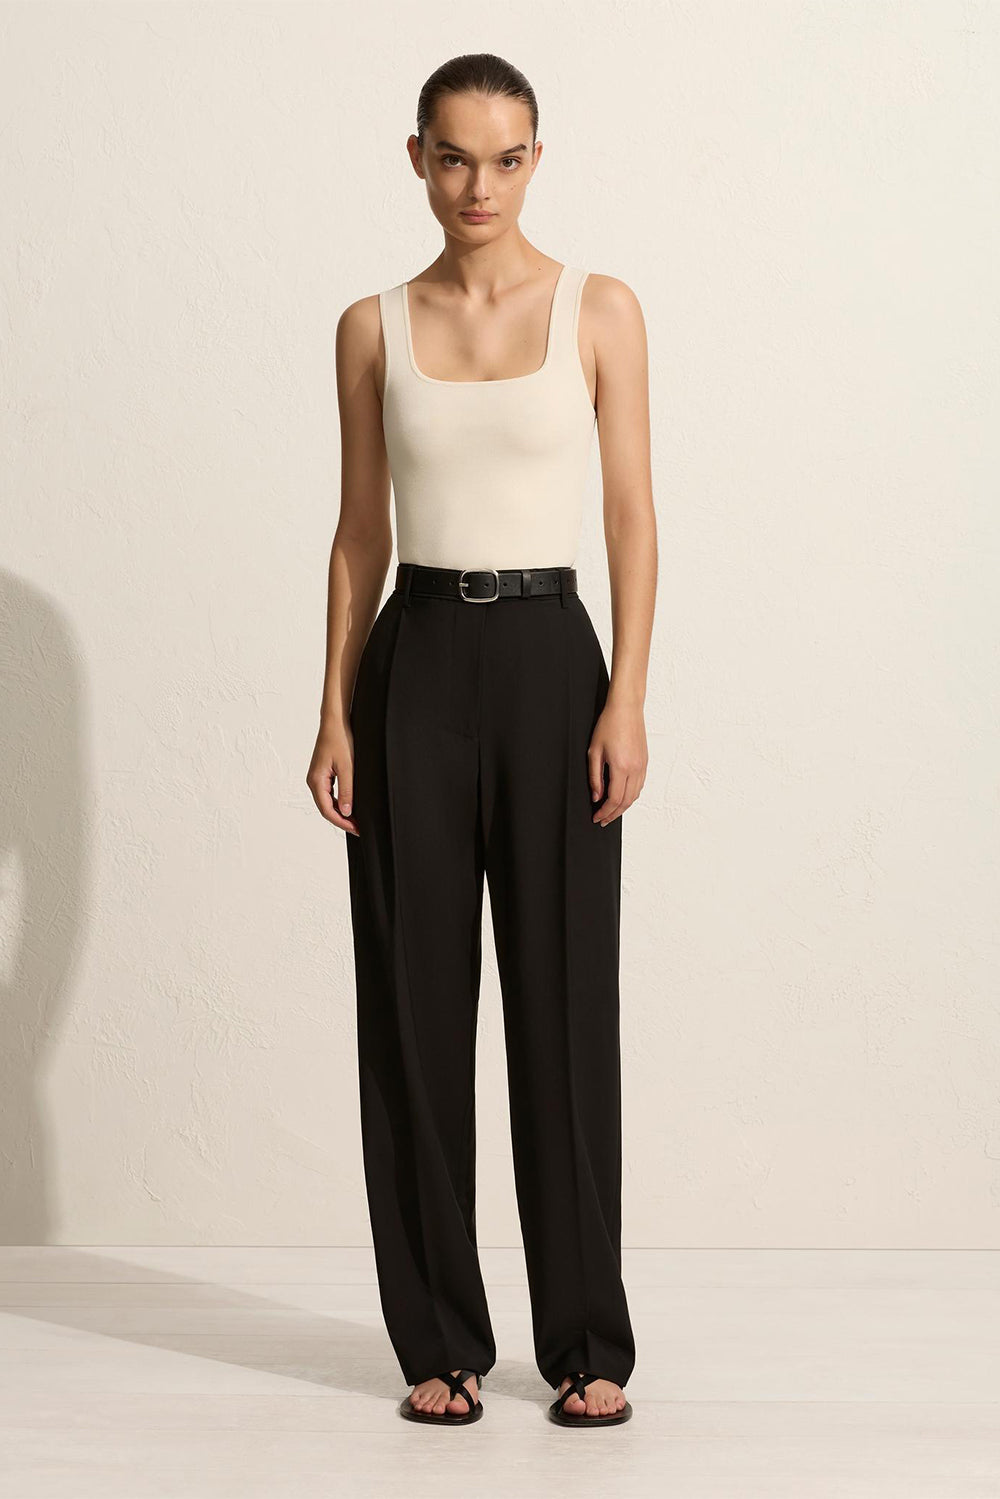 Matteau | Resort 20 Now Available Online – The Standard Store